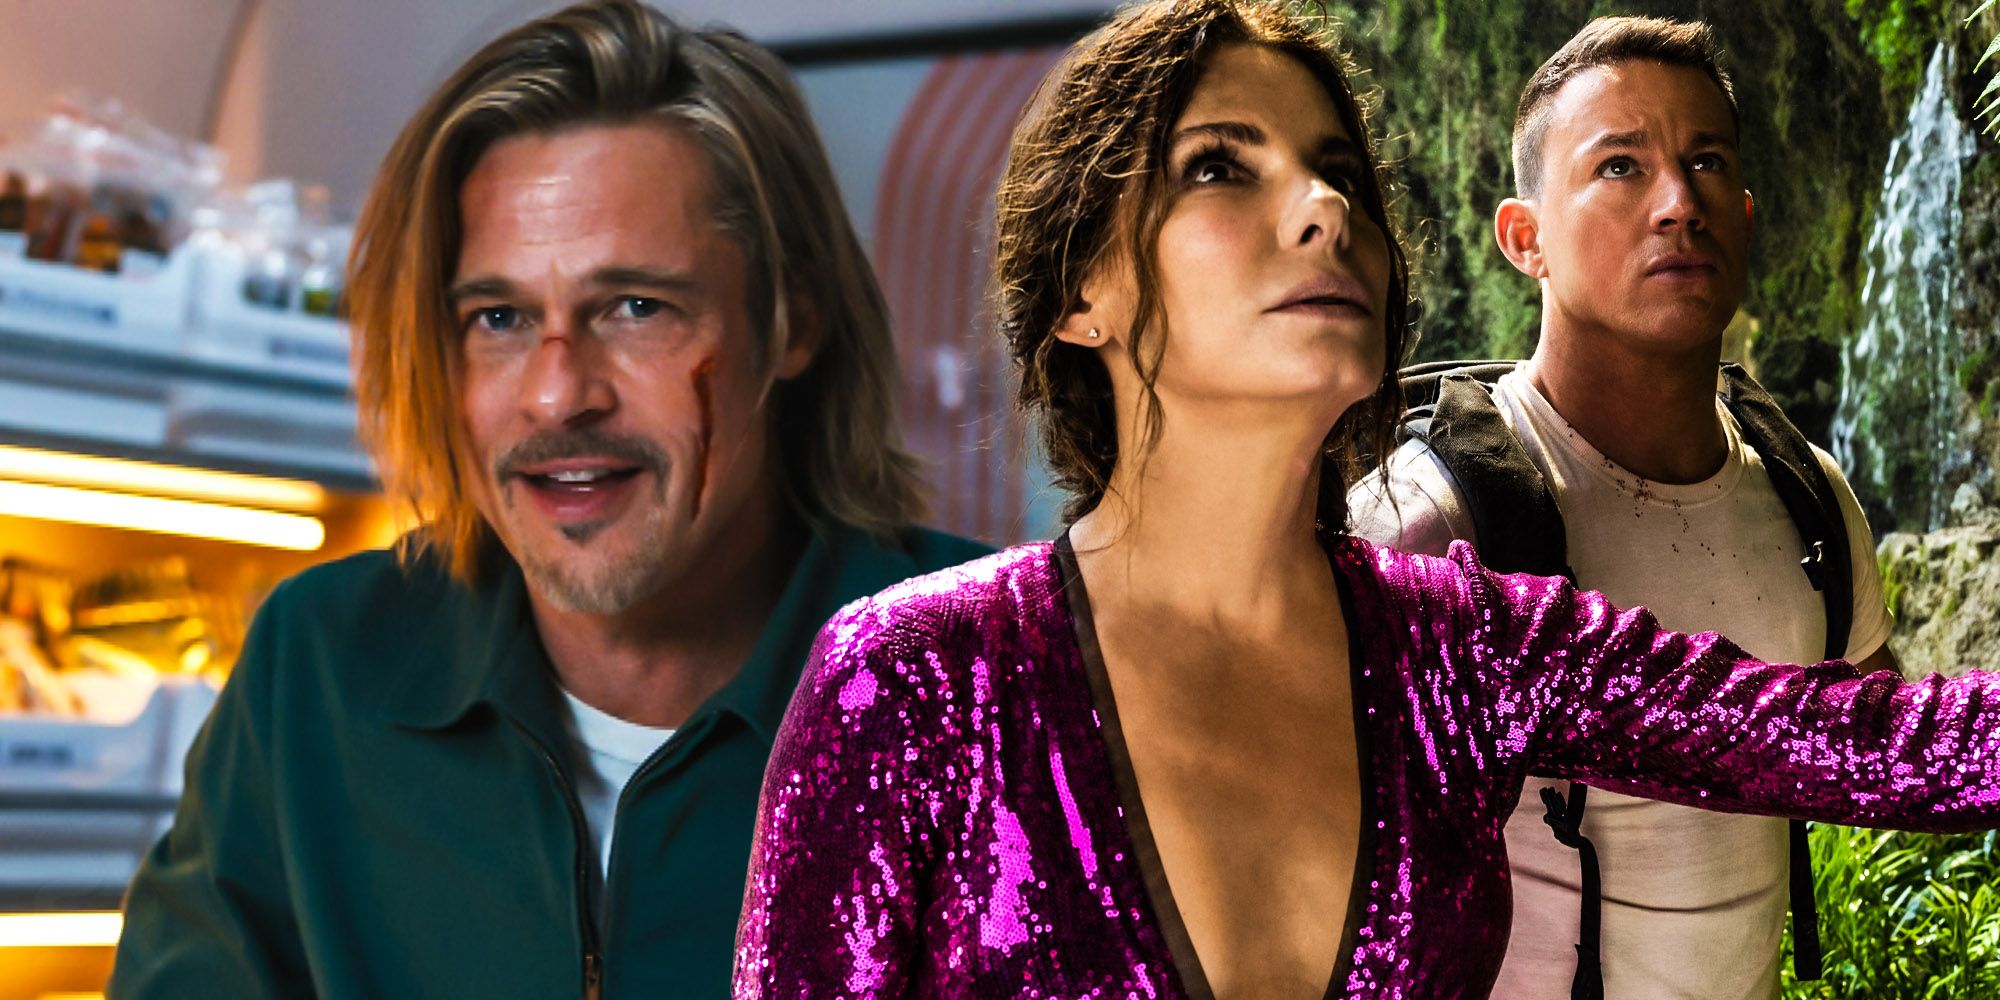 Bullet train and The lost city Make For A Unexpected 2022 Movie trend brad pitt sandra bullock